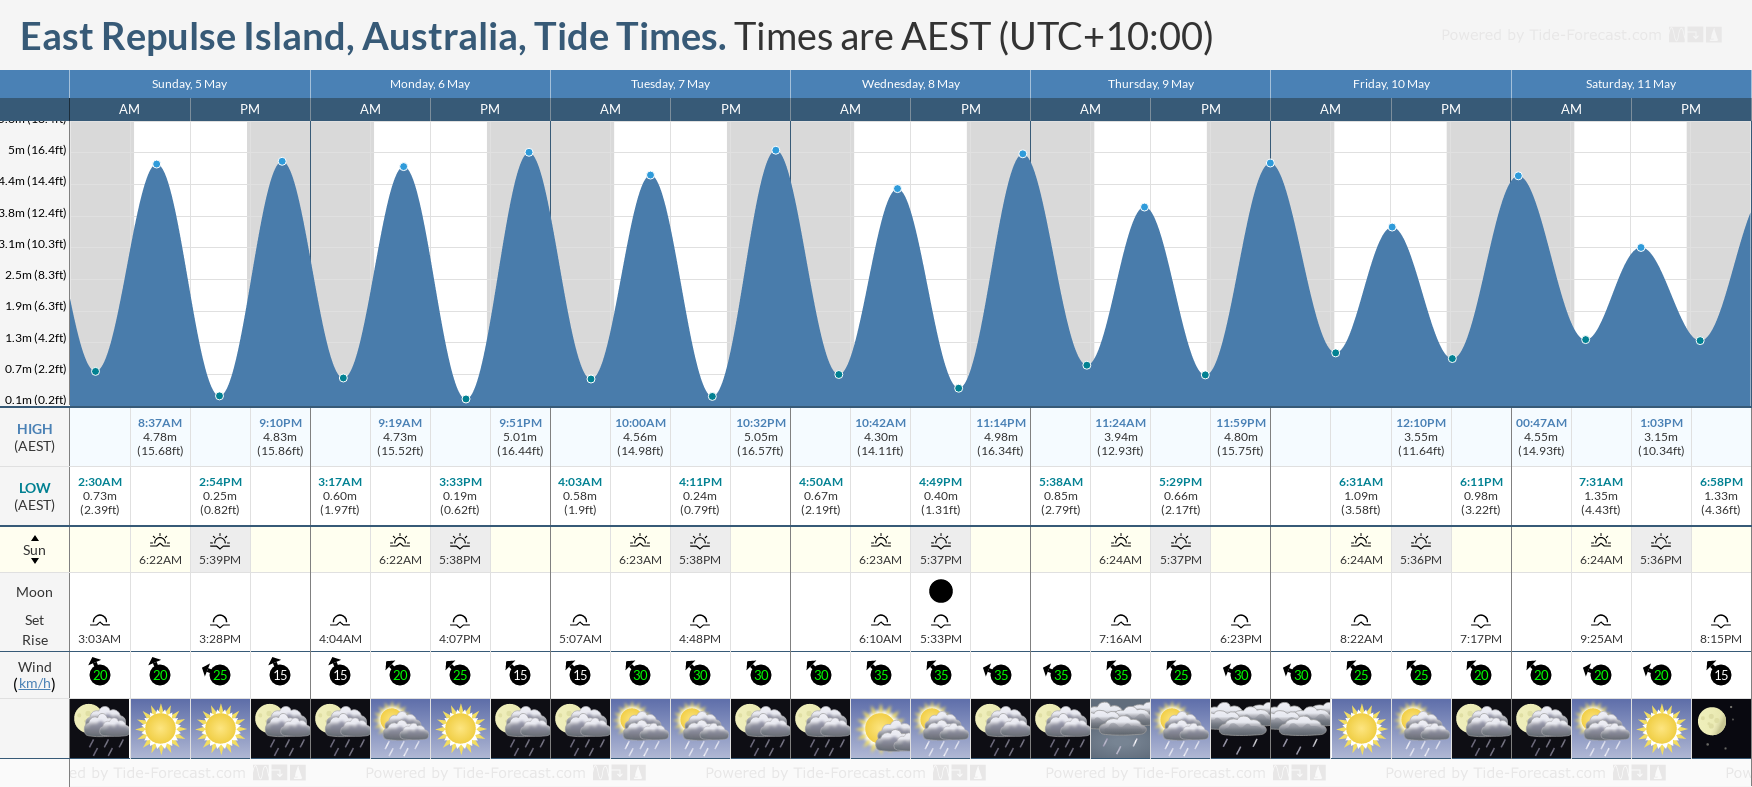 East Repulse Island, Australia Tide Chart including high and low tide tide times for the next 7 days